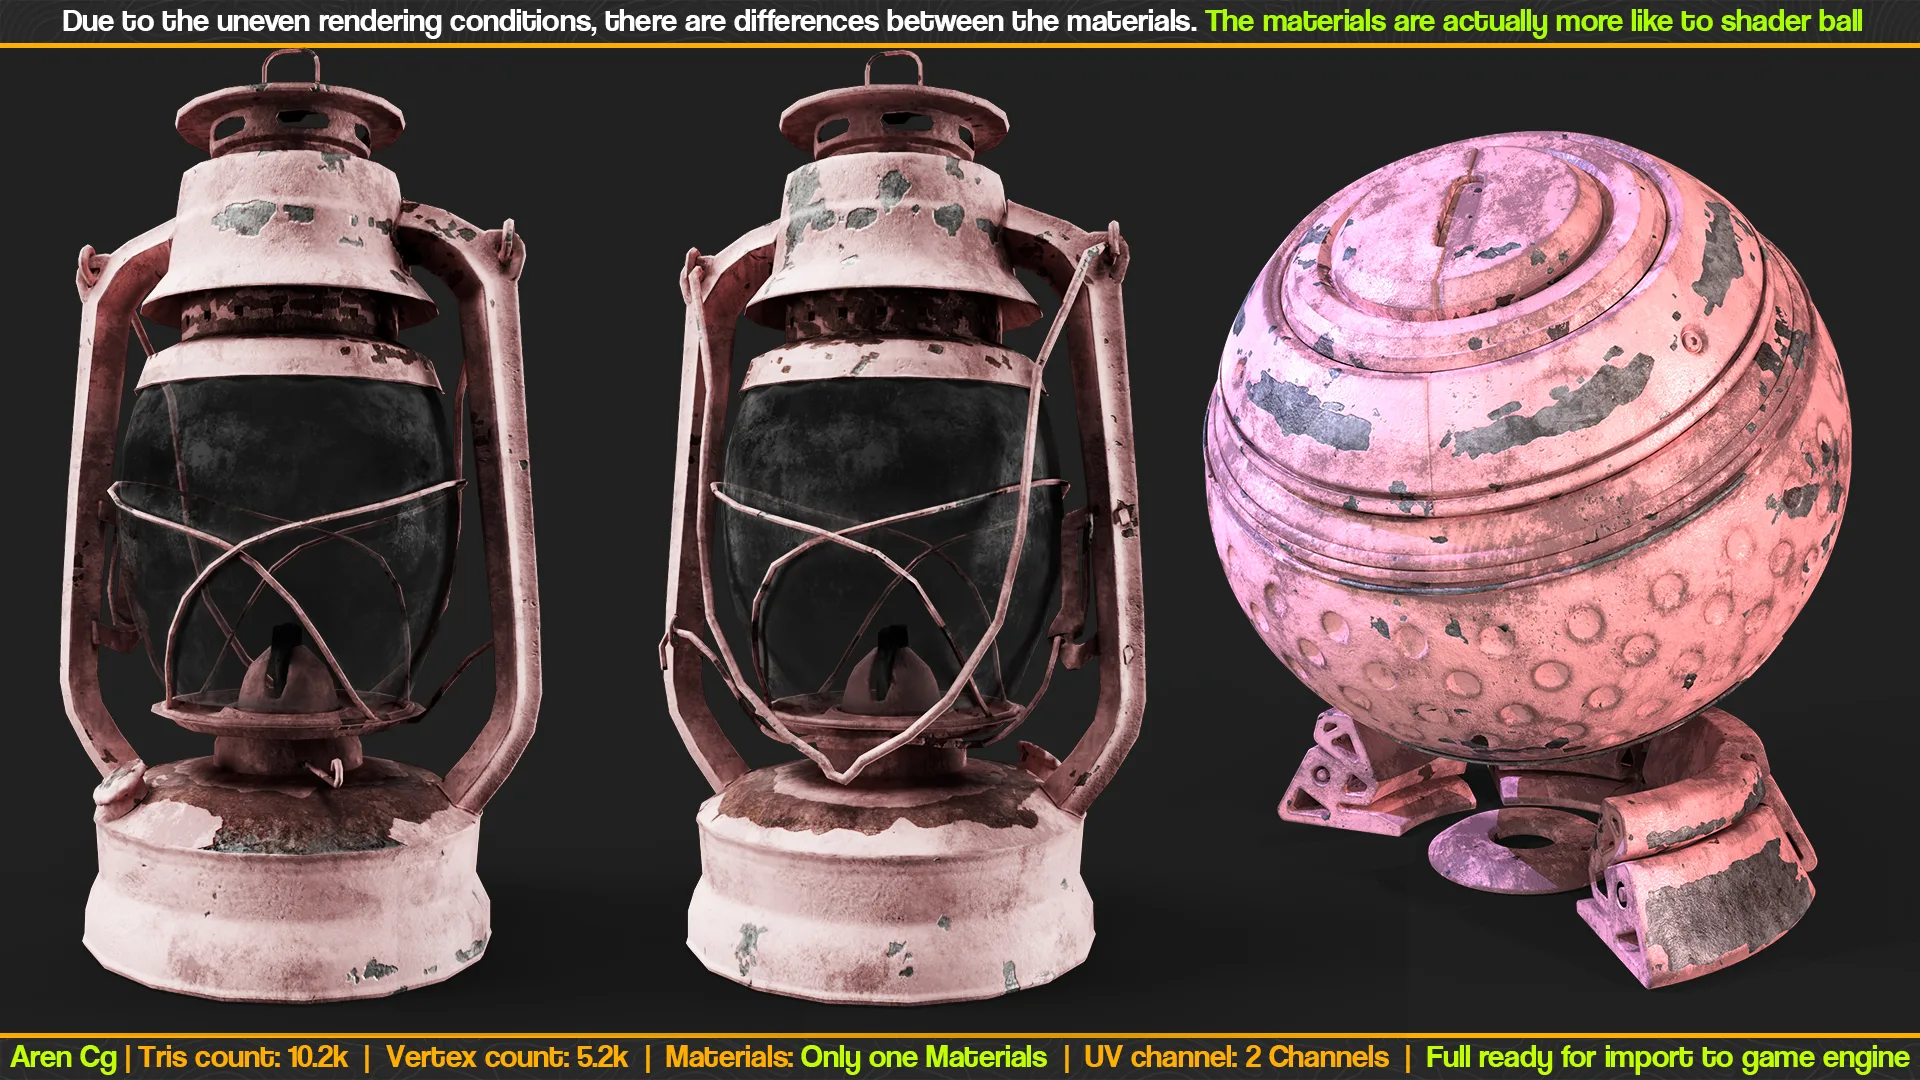 Old rusted Lantern 02 and Metal smart materials - Game ready